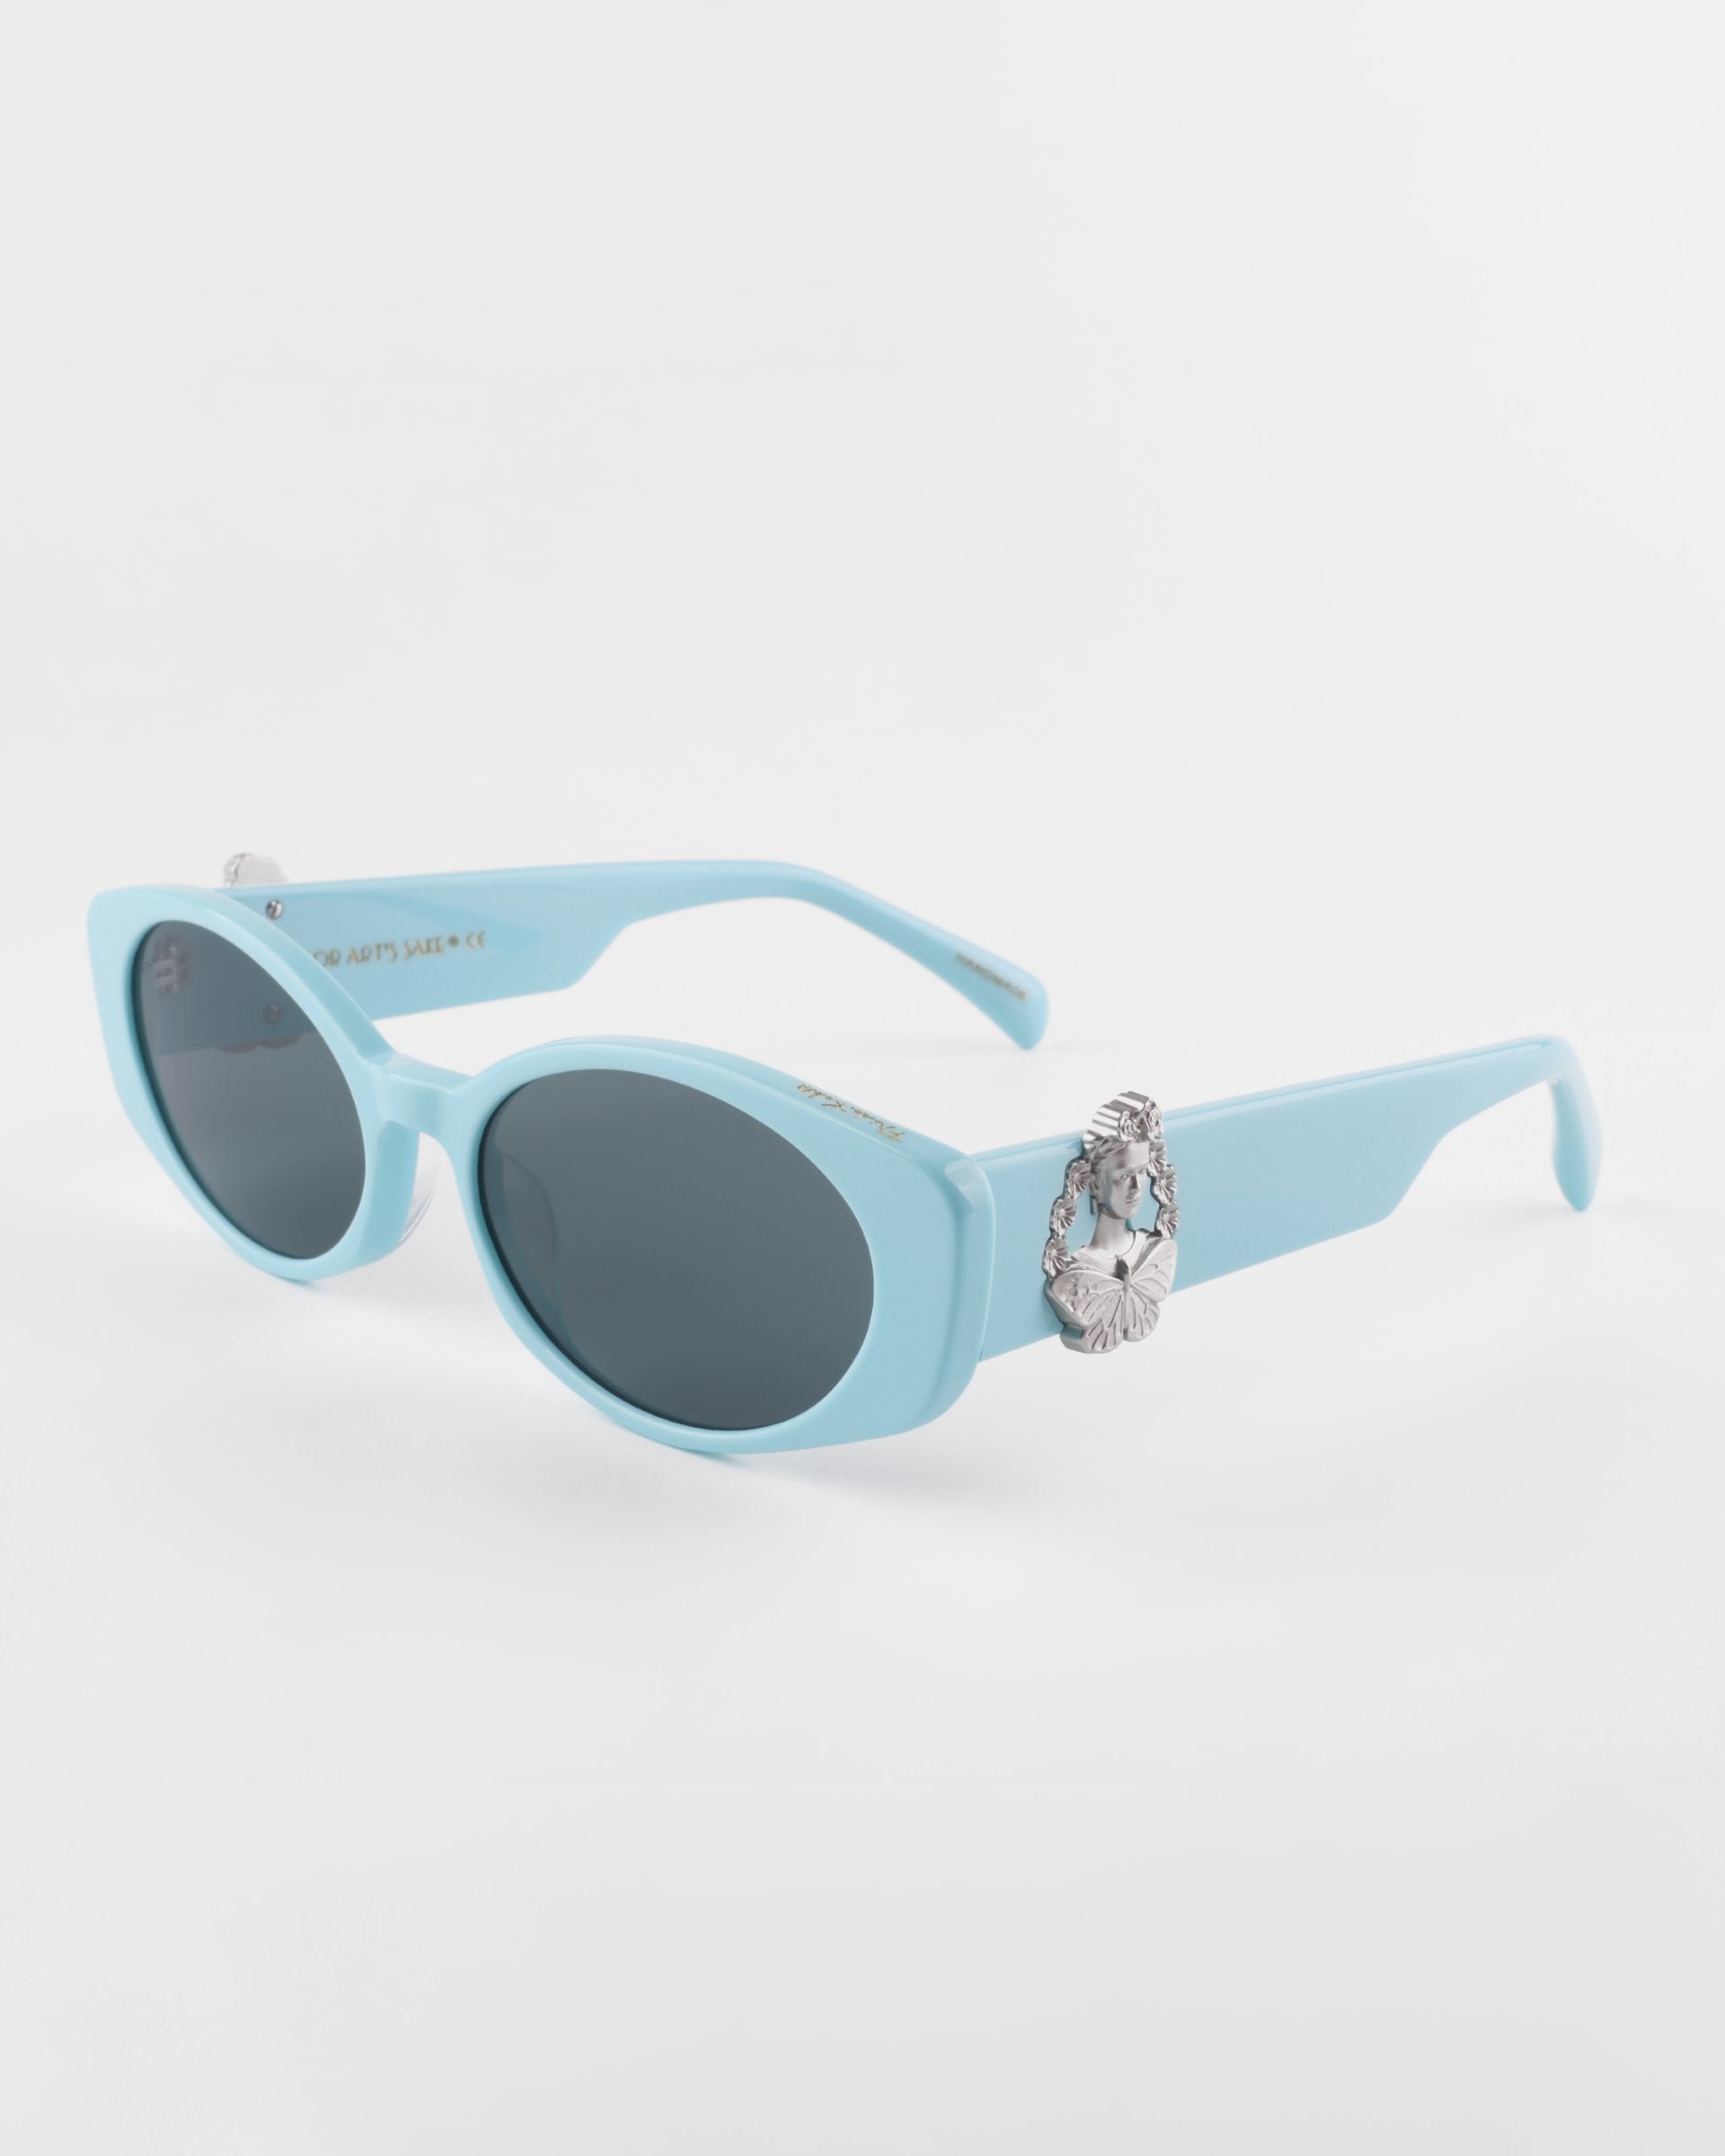 A pair of light blue, oval-shaped Frida Portrait sunglasses by For Art&#39;s Sake® with ultra-lightweight Nylon lenses that provide 100% UVA &amp; UVB protection. The frame features decorative silver embellishments on the sides, adding a touch of uniqueness to the design. The background is plain white, highlighting the stylish eyewear.